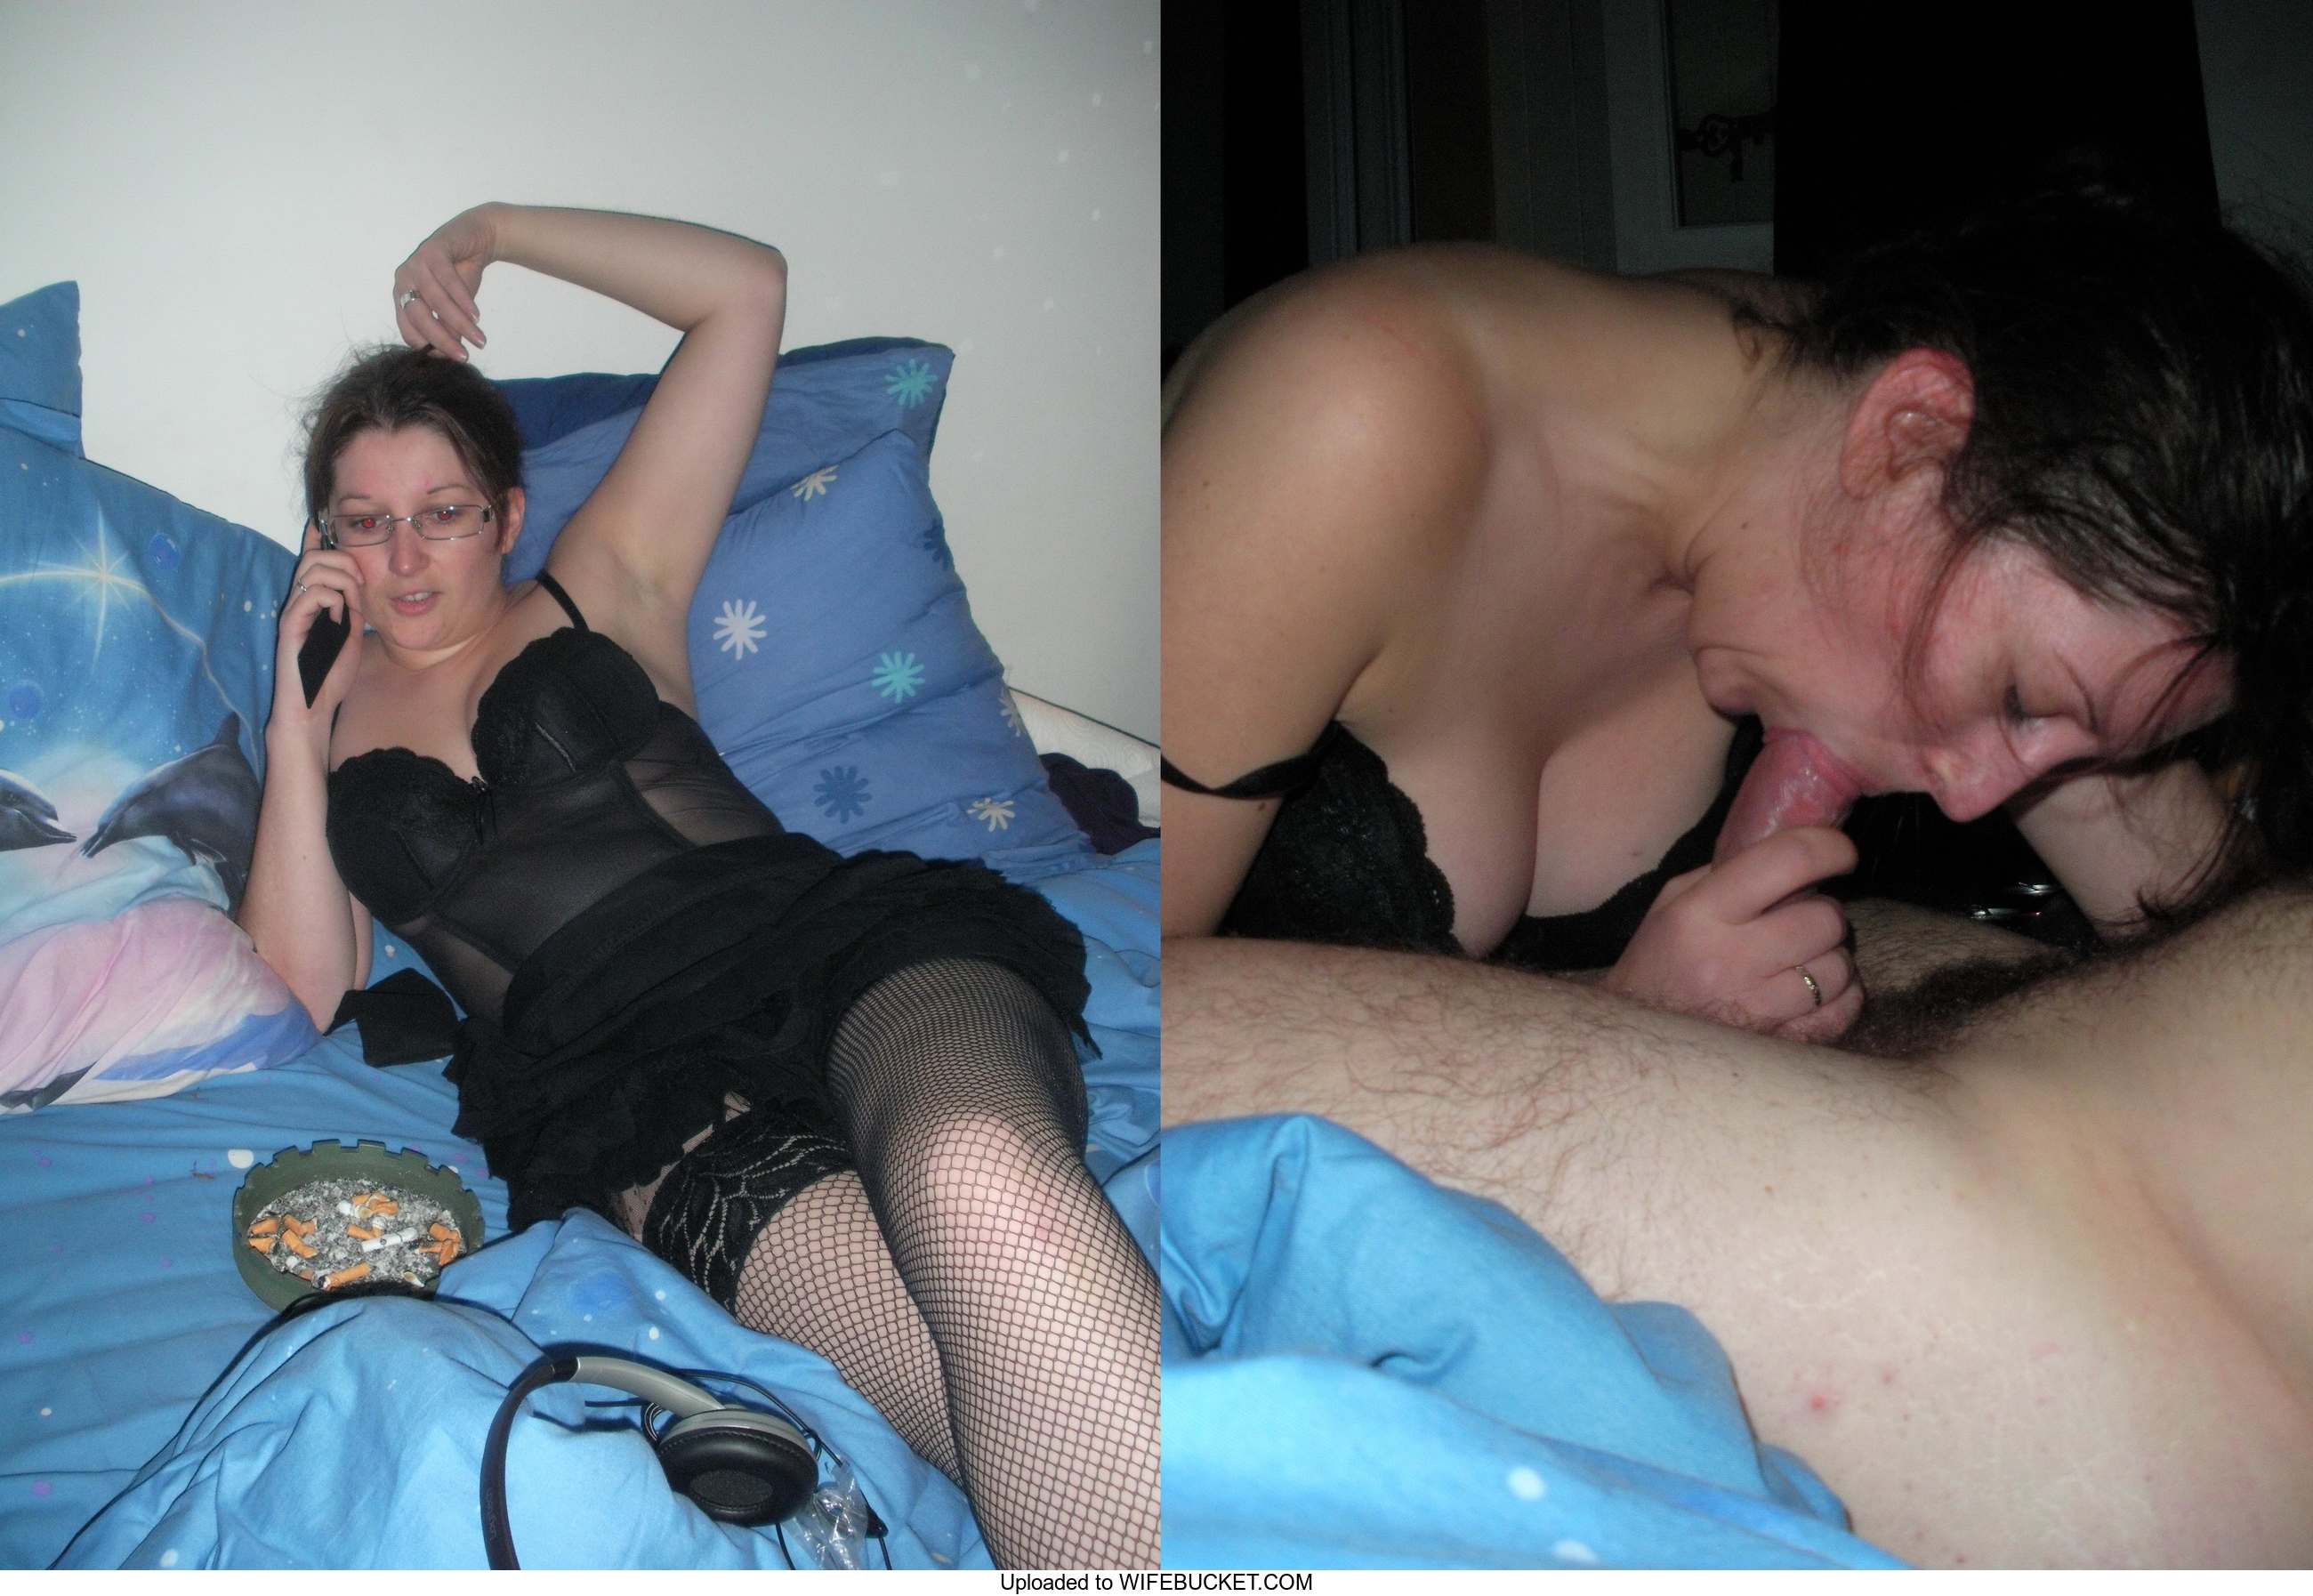 34 photos of wives before and after the blowjob